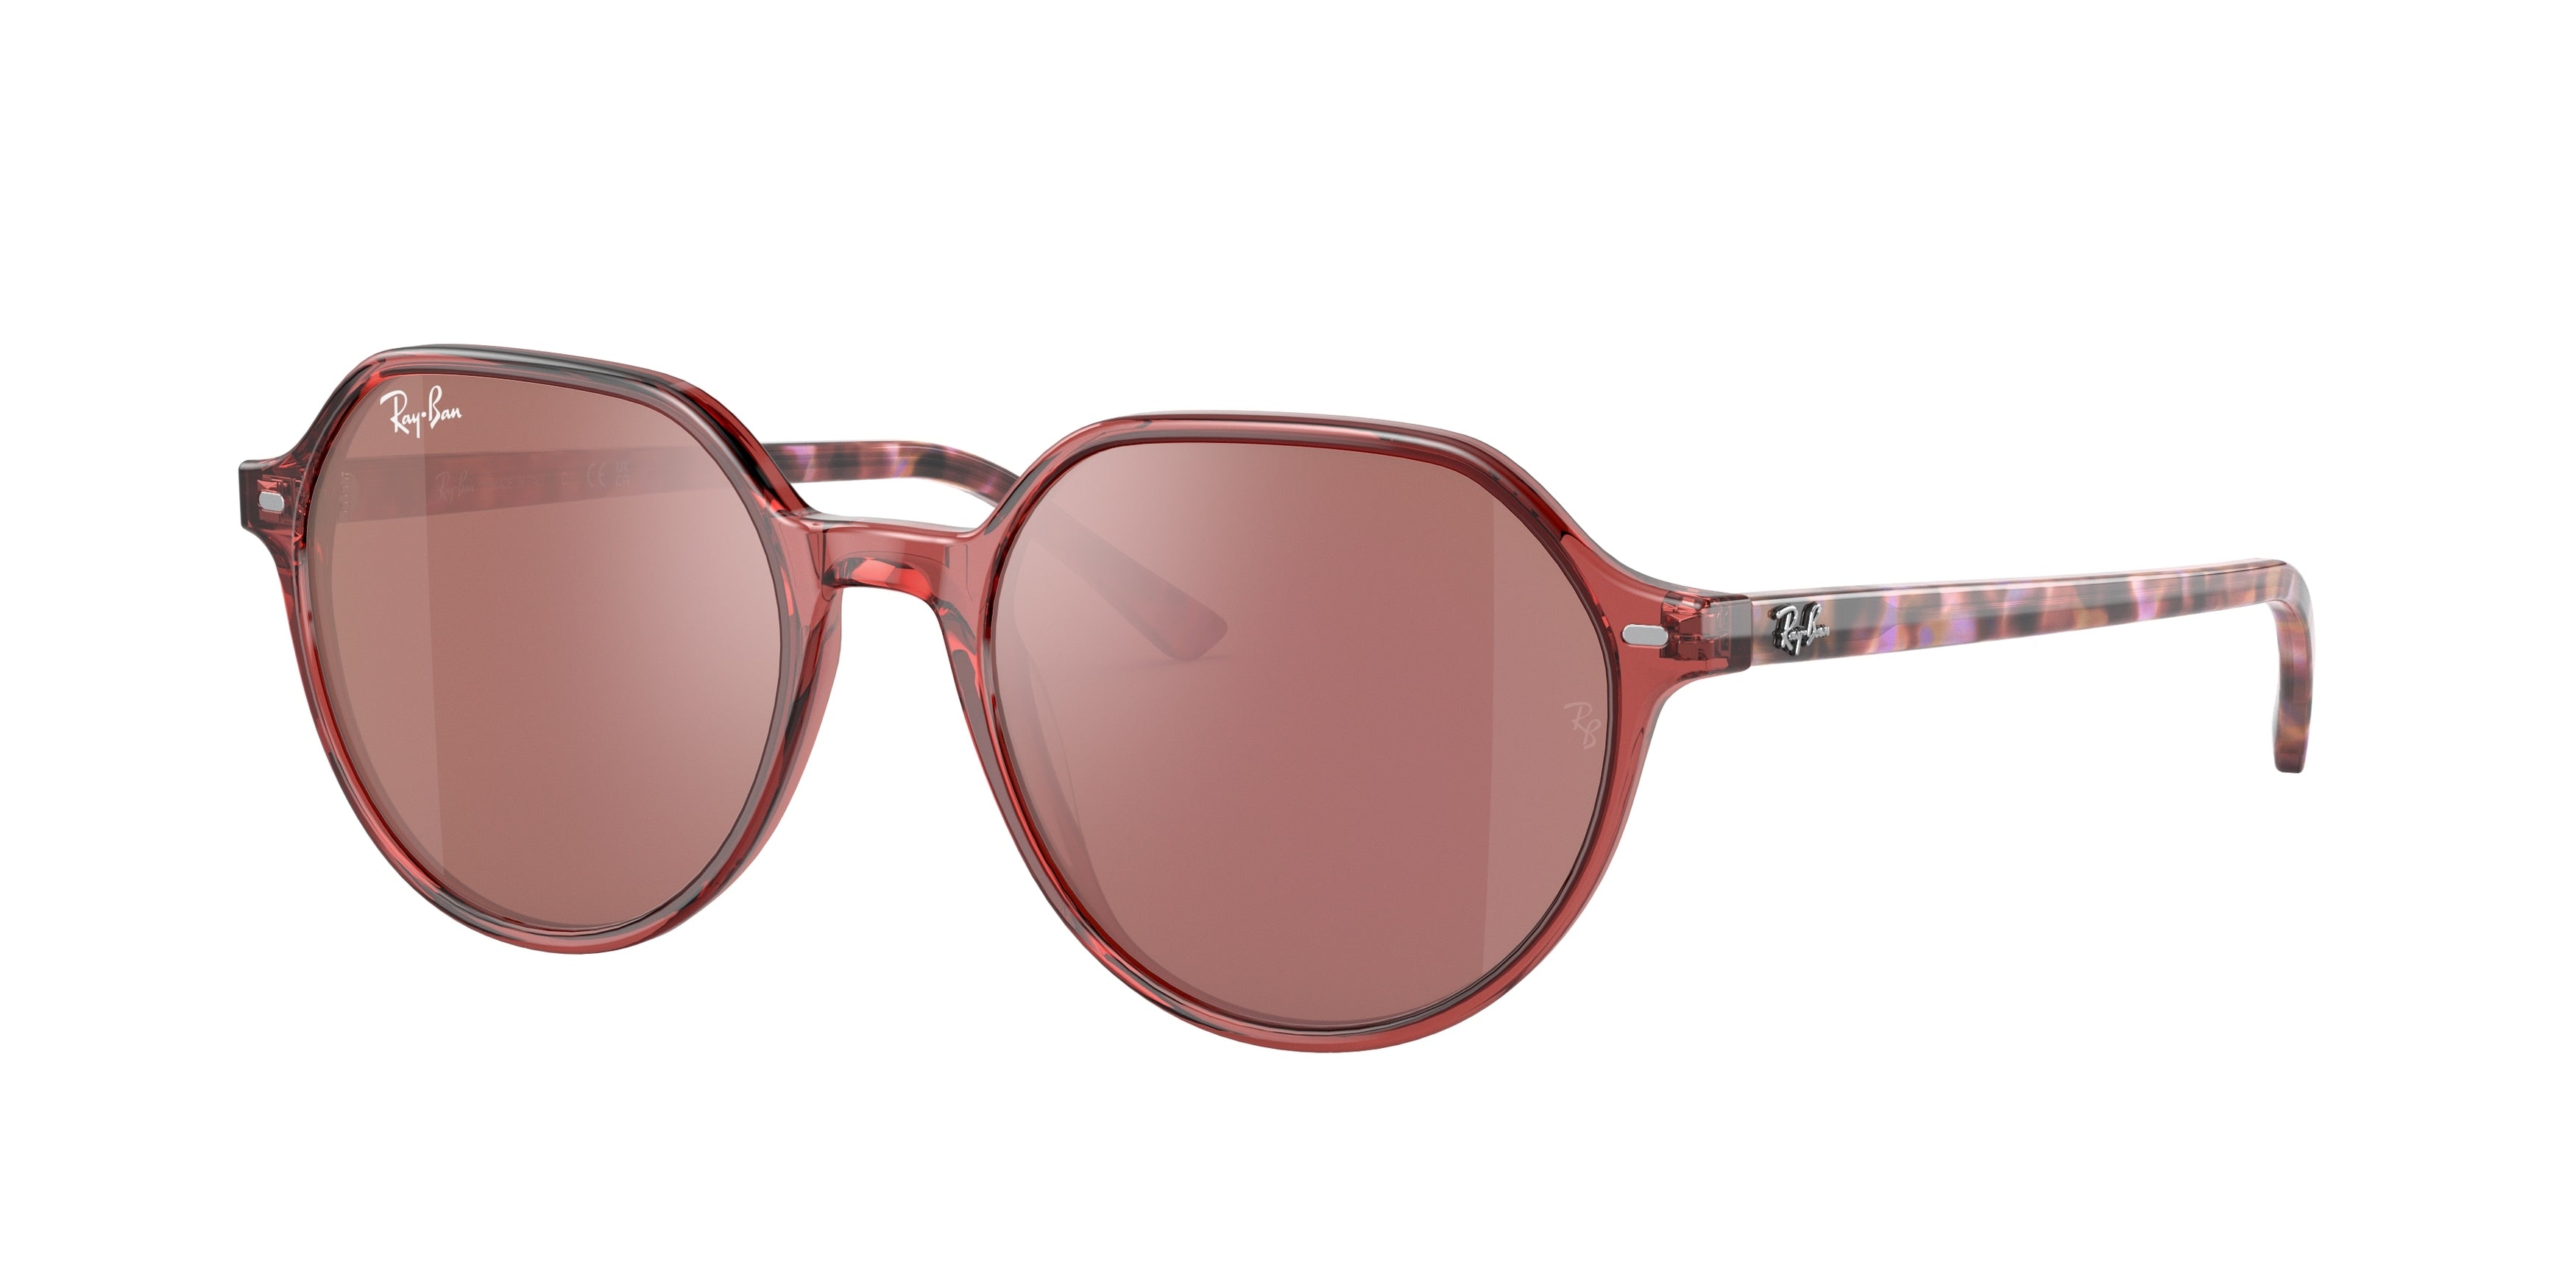 Ray-Ban THALIA RB2195 Square Sunglasses  66372K-Transparent Pink 51-145-18 - Color Map Pink